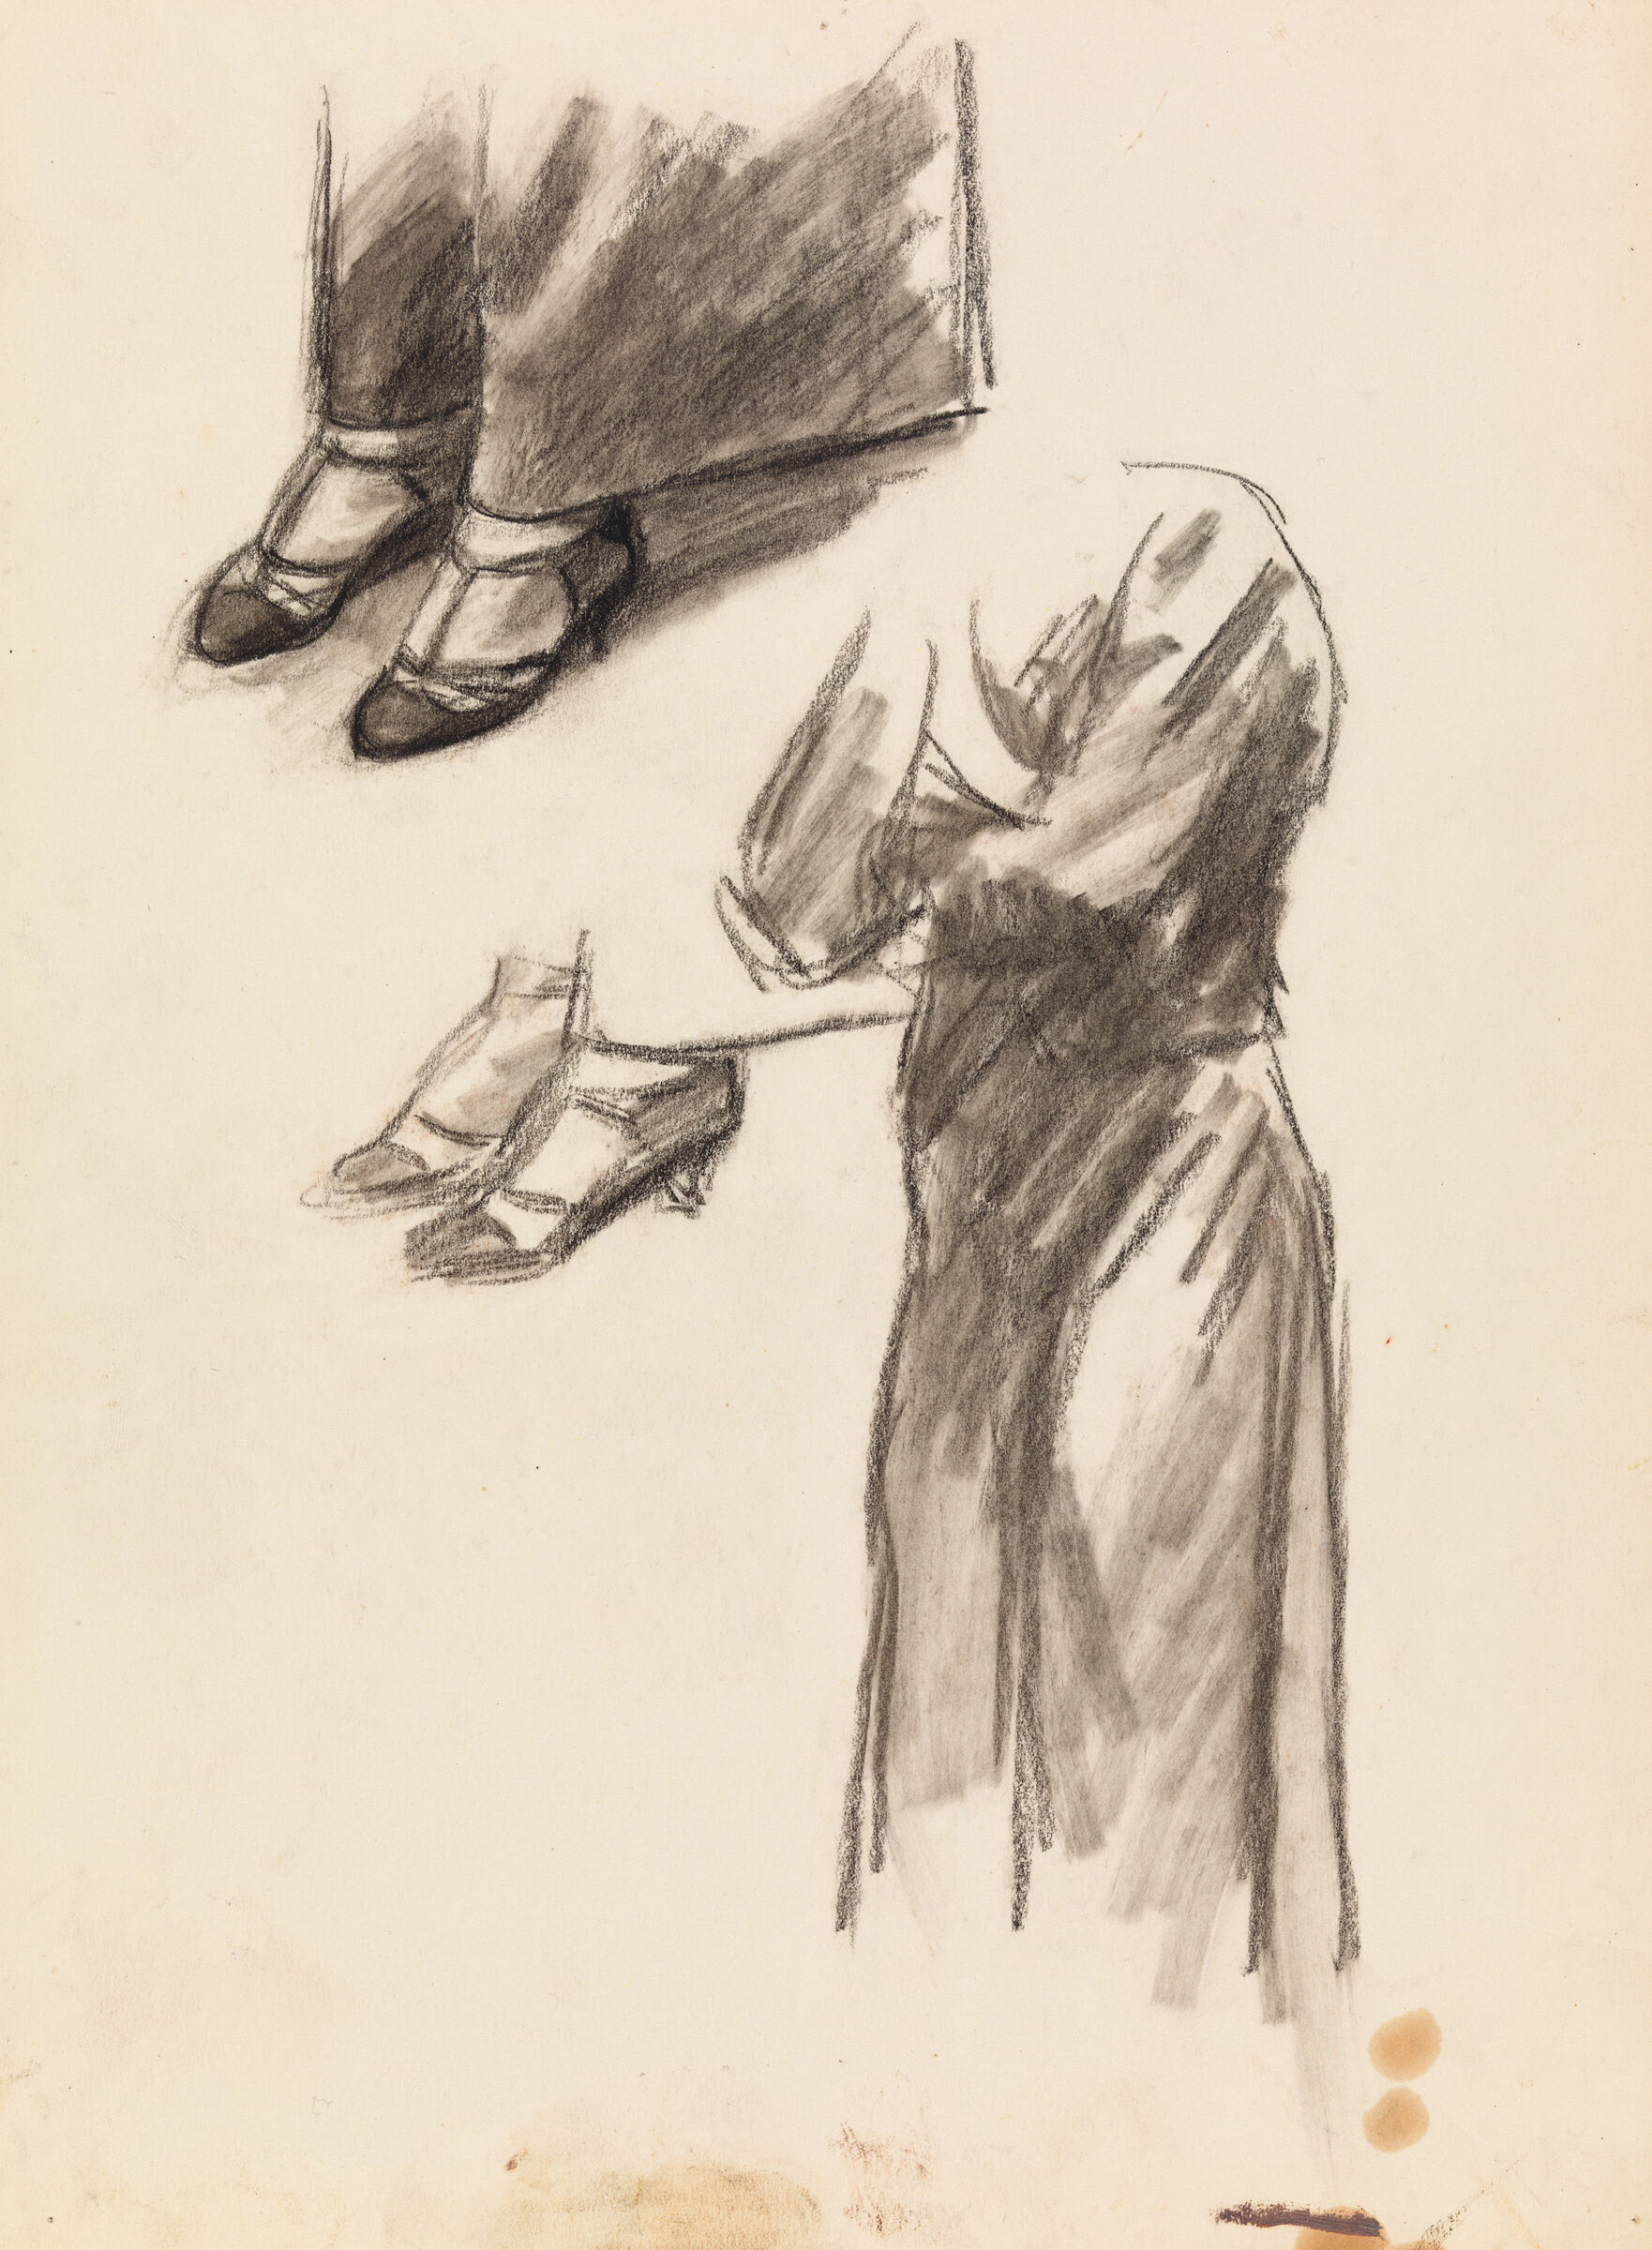 Sketches of a woman's shoes and her dress.